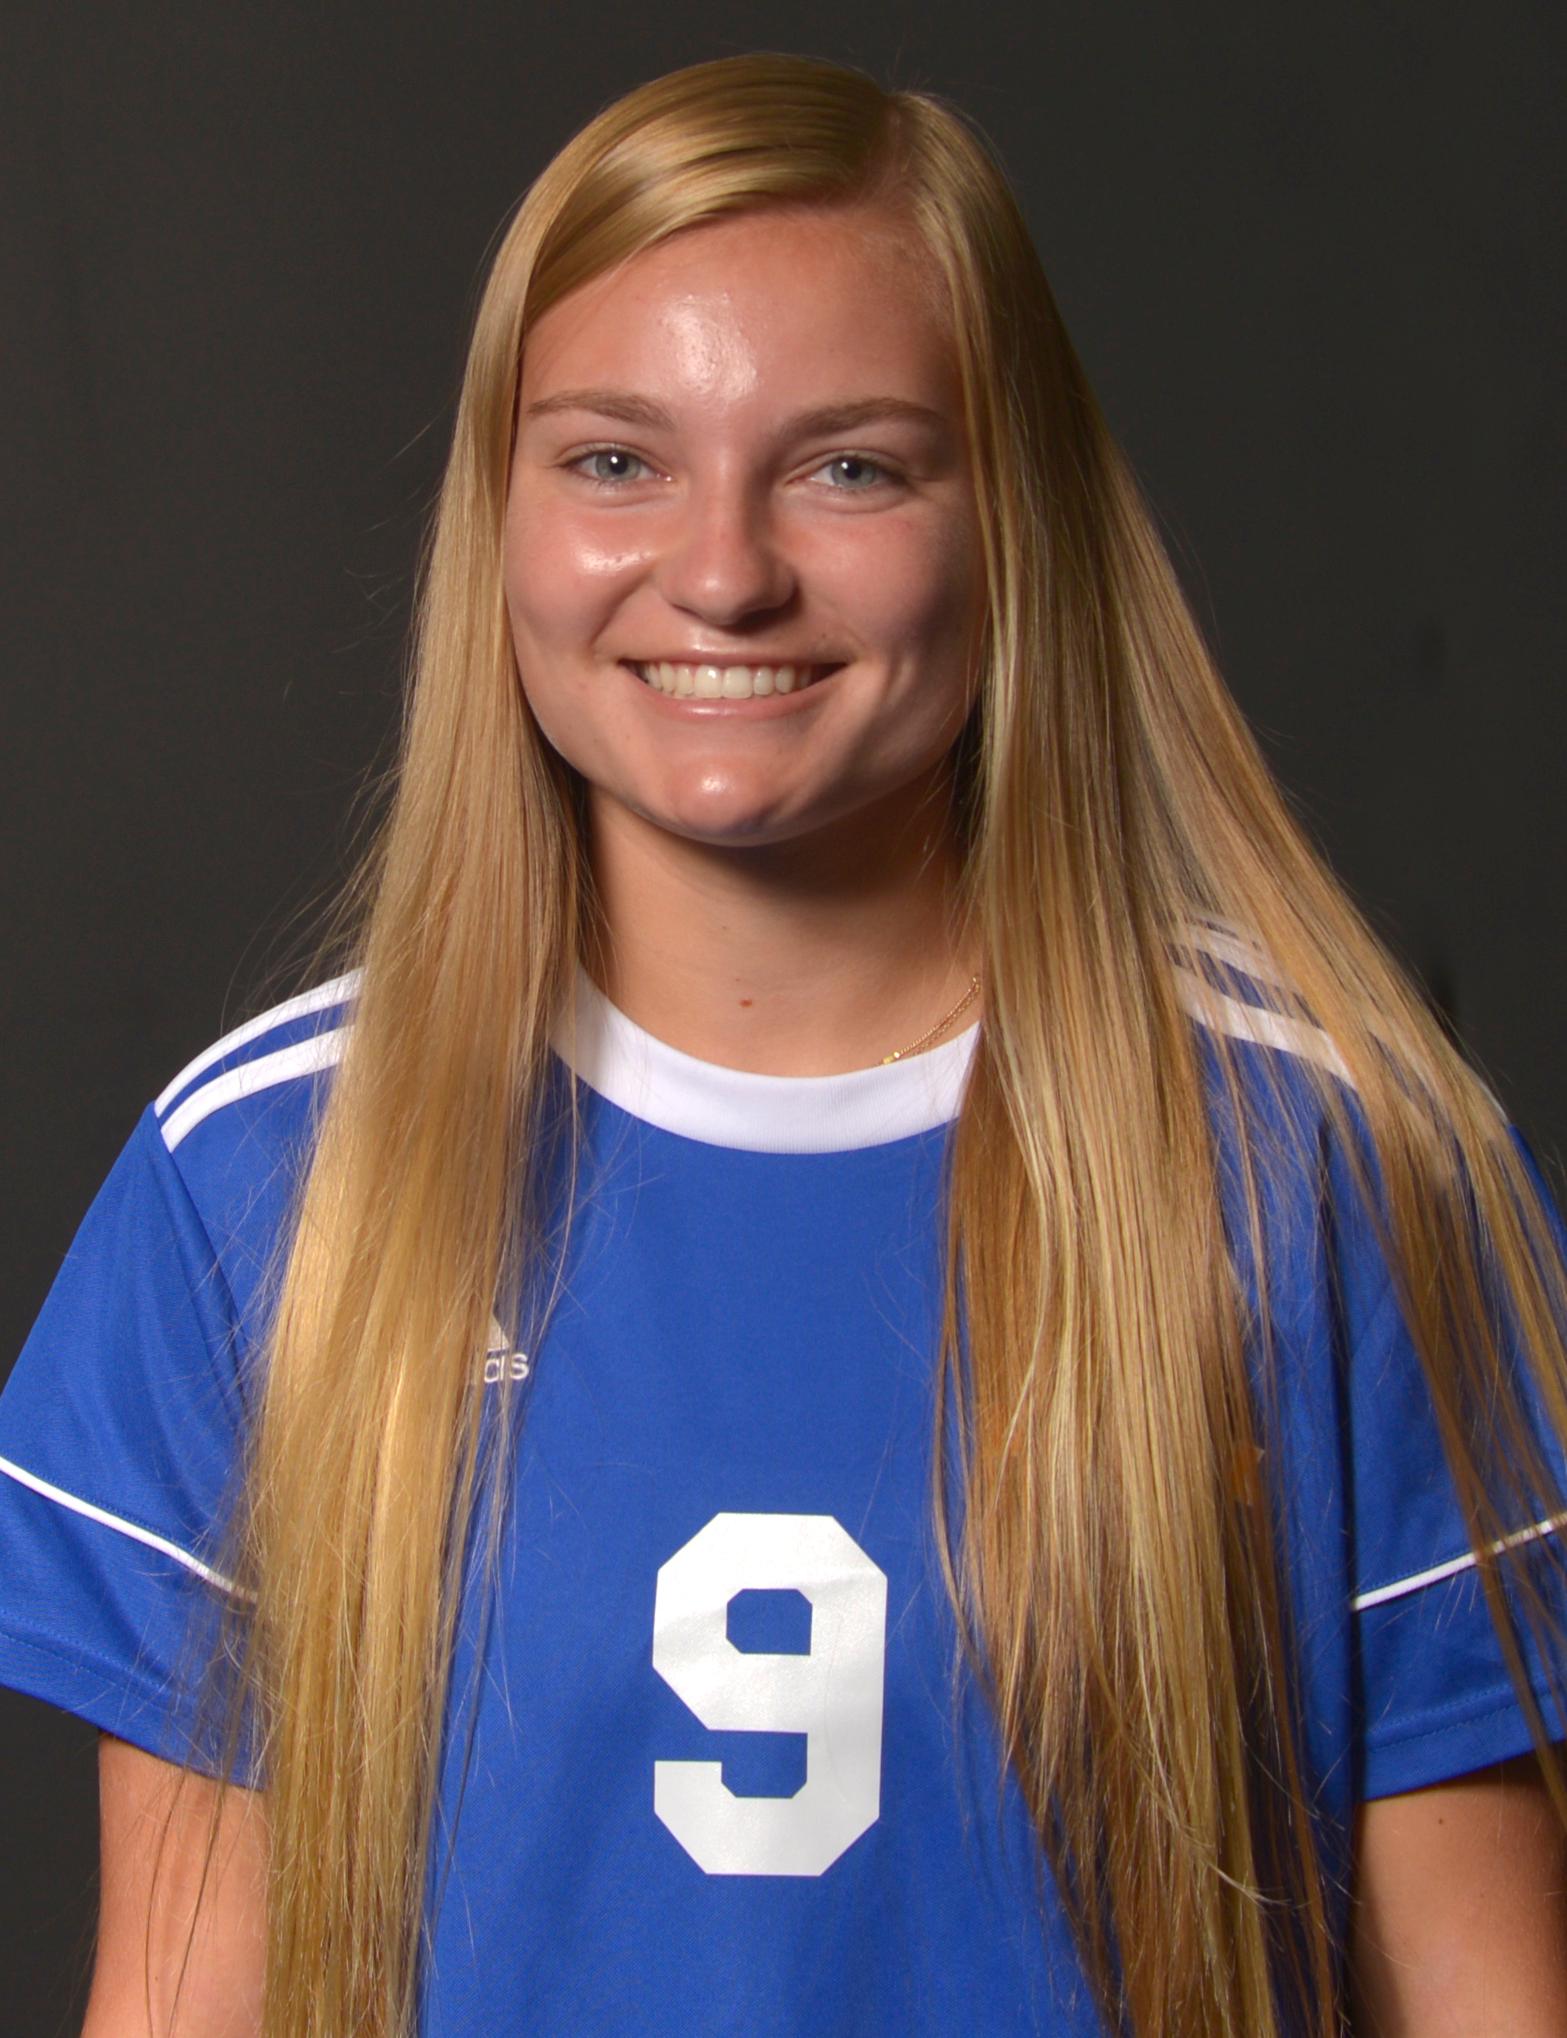 Chunco nets four goals in NCCC victory